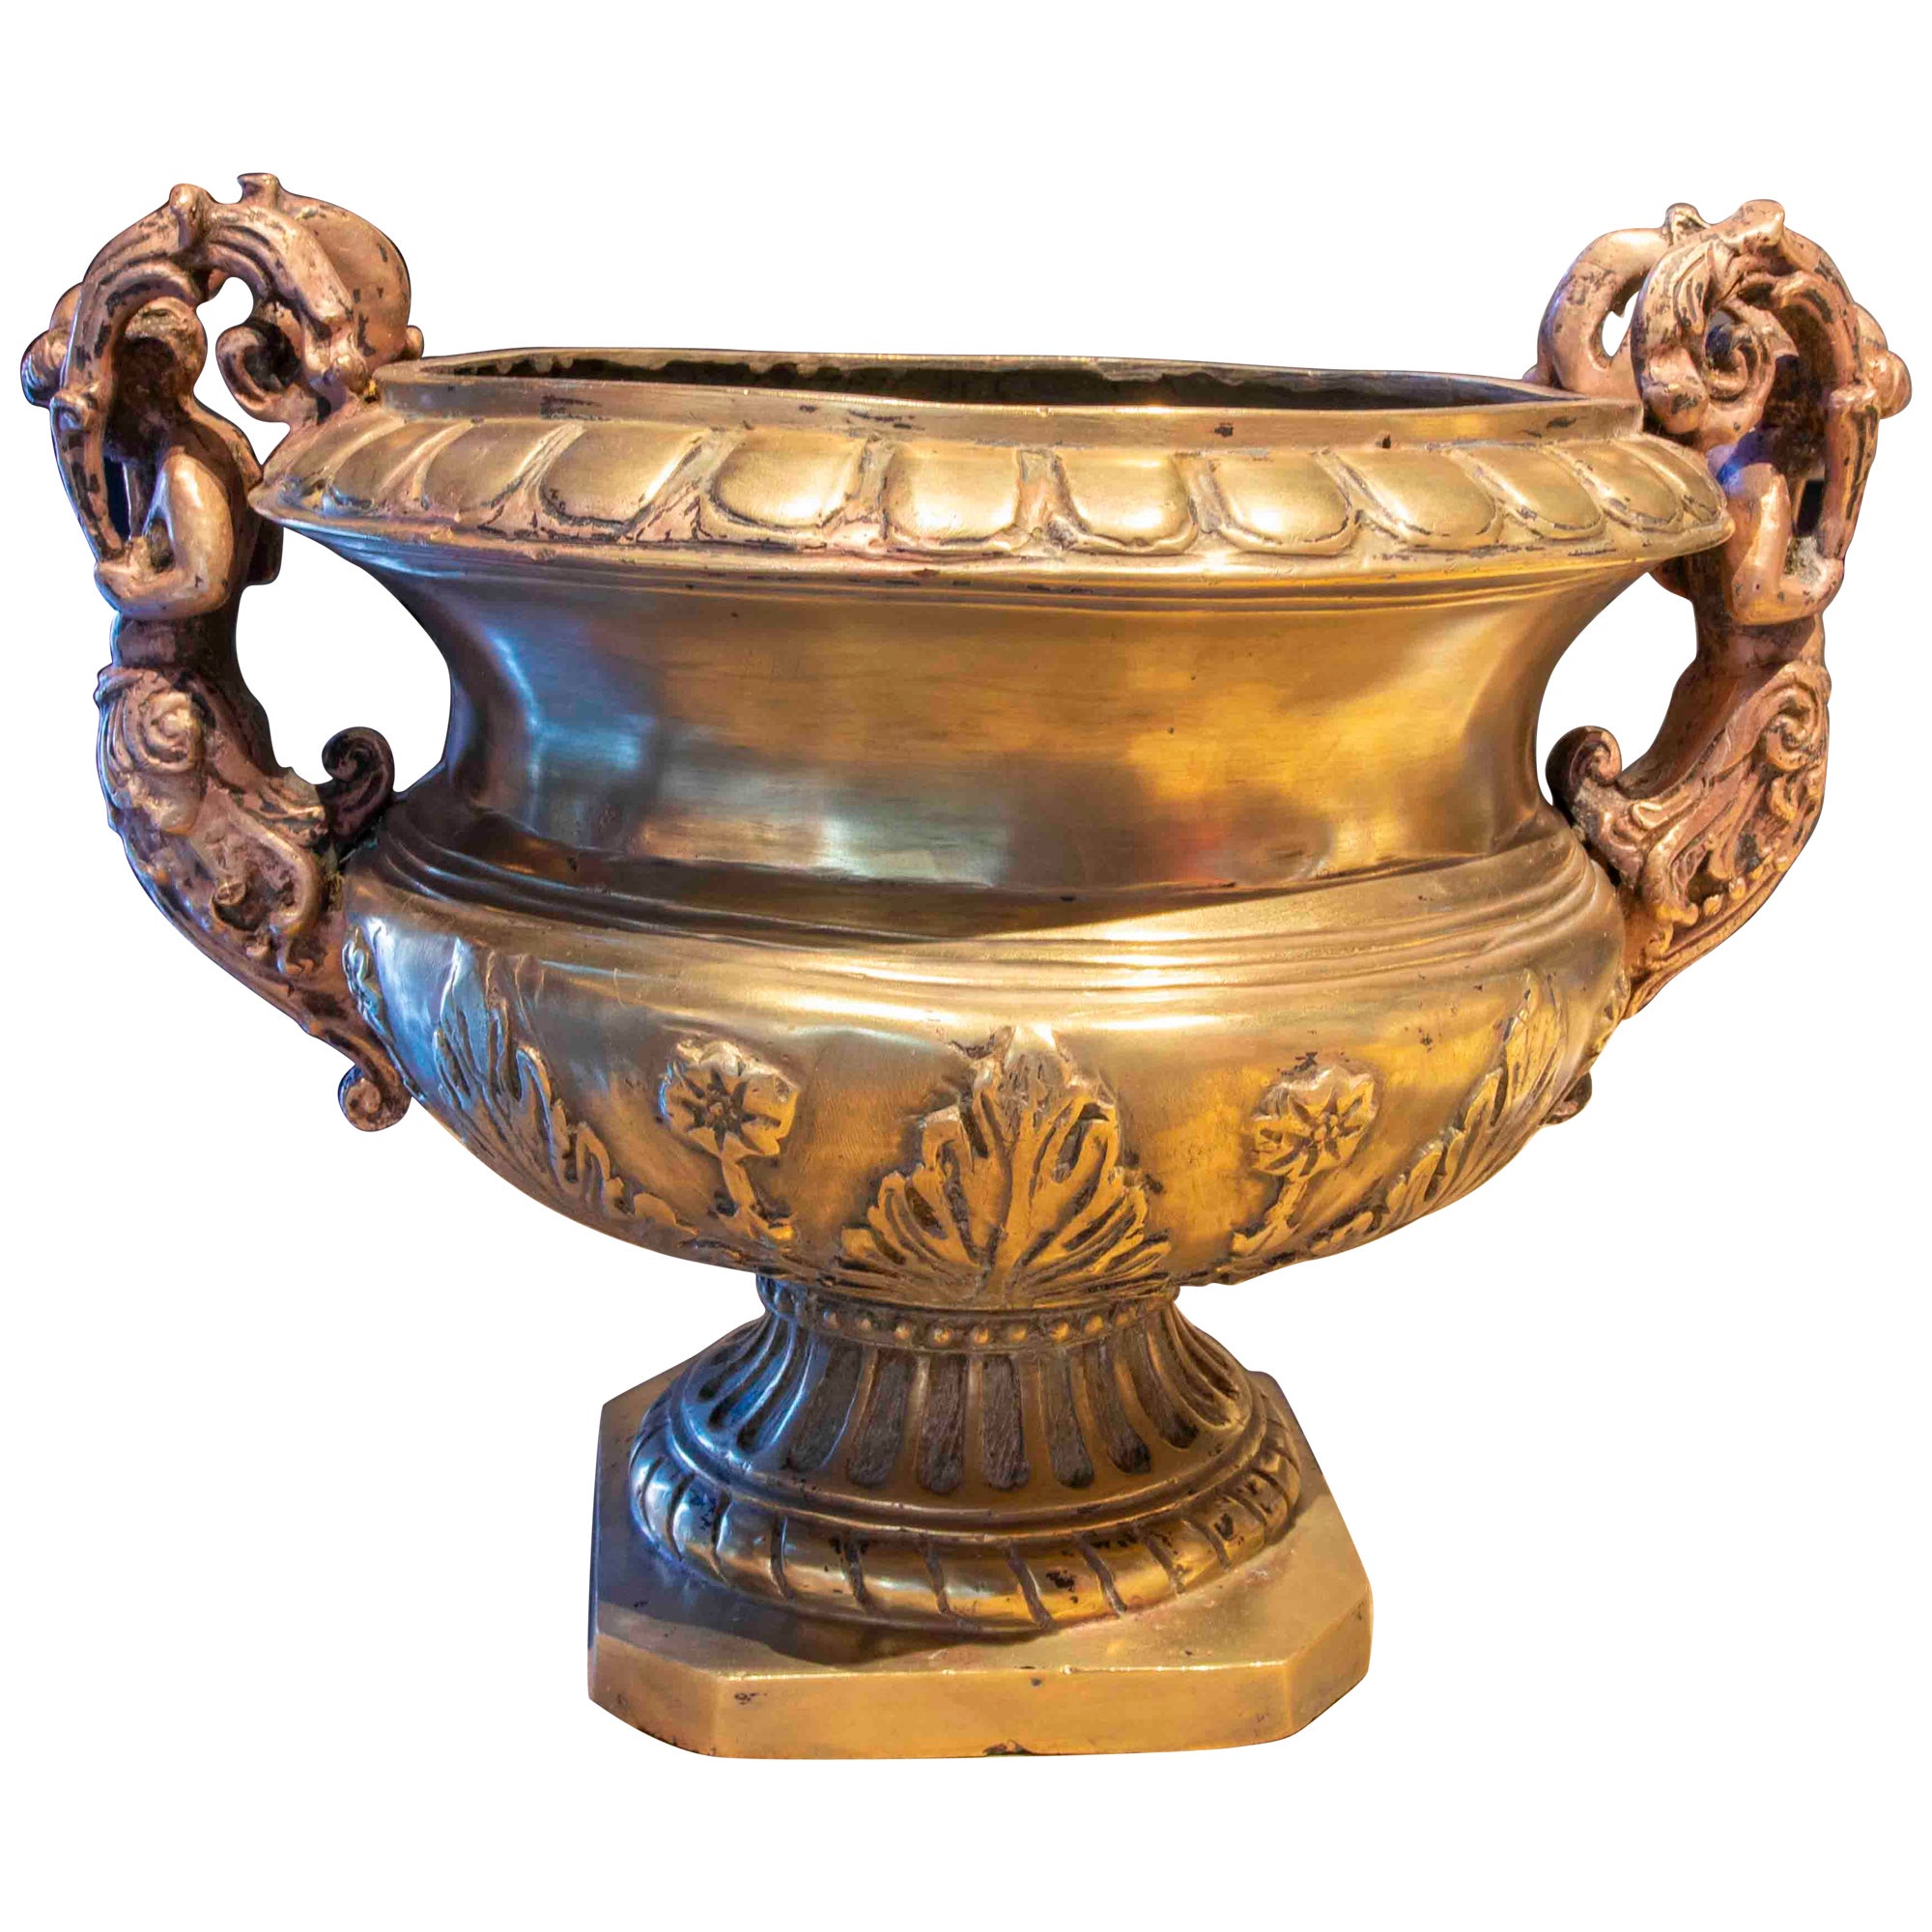 Bronze Cup with Children on Handles, Gadrooned Decorations and Plants